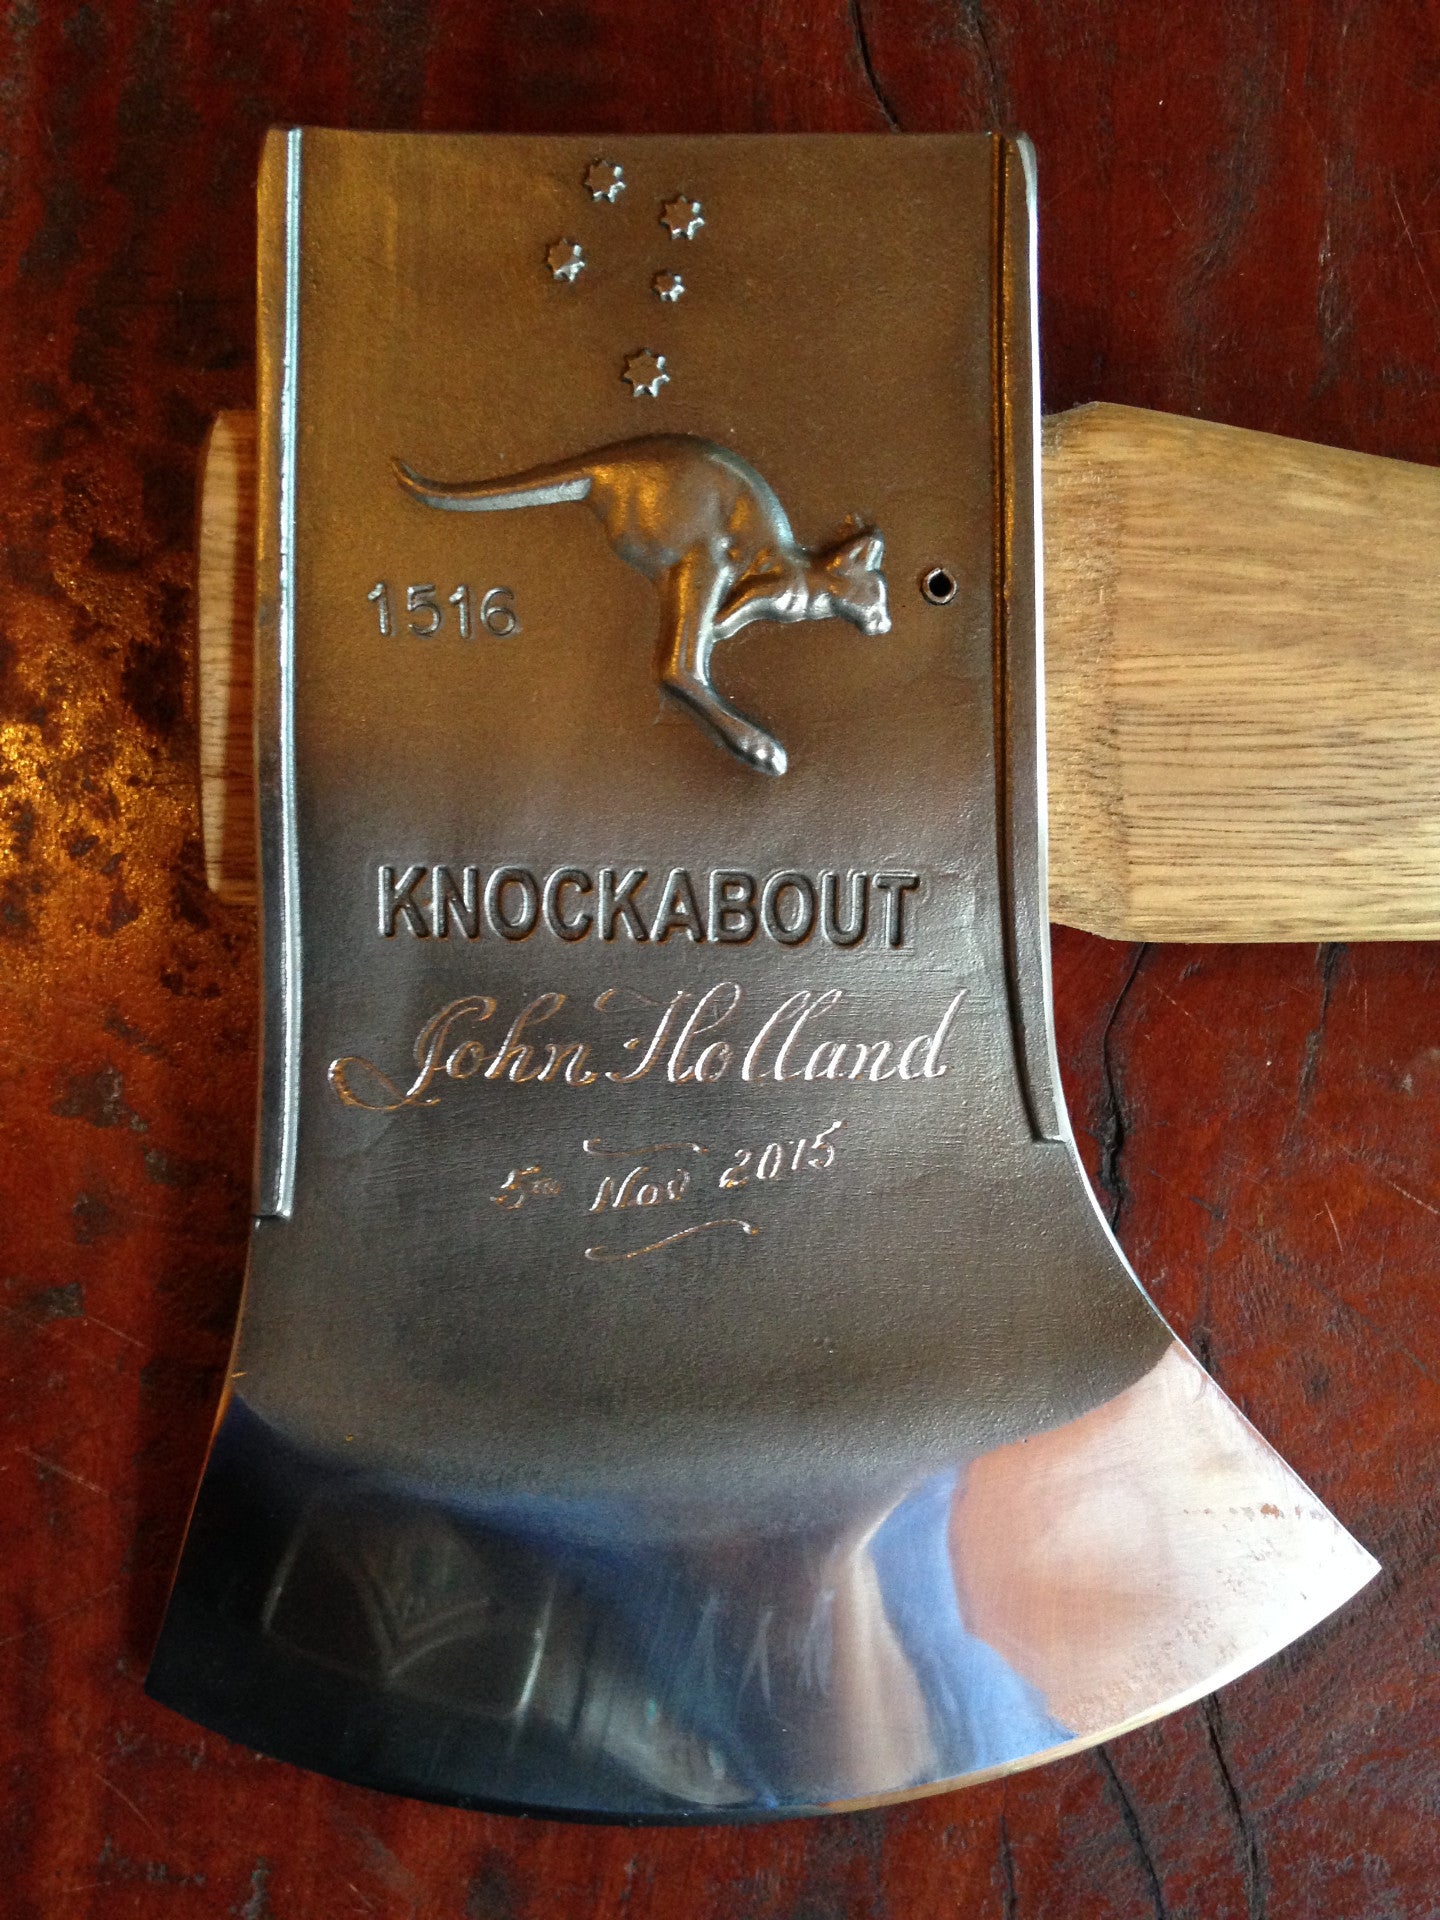 Series 2 Knockabout Axe with spotted gum handle 2.1kg. including leather cover SOLD OUT